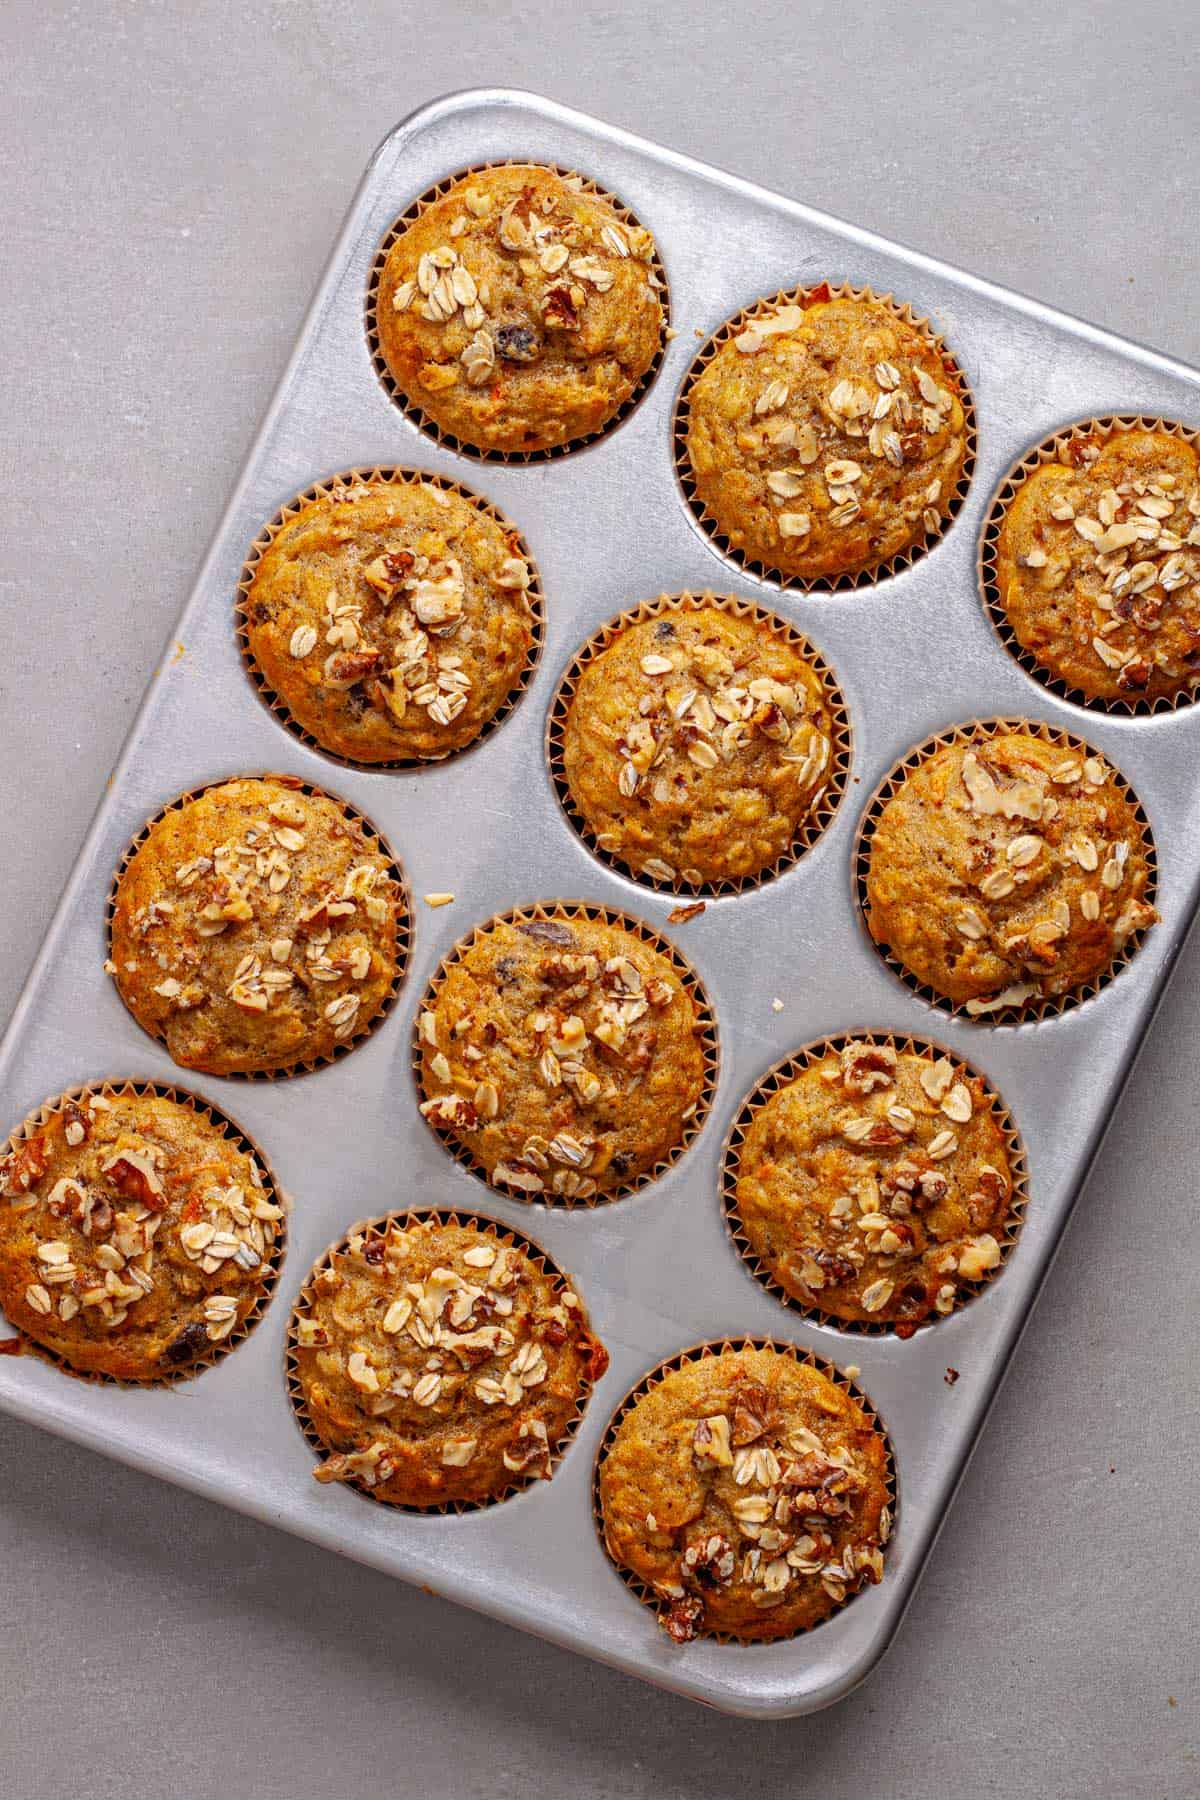 Freshly baked carrot banana muffins on a gray table.